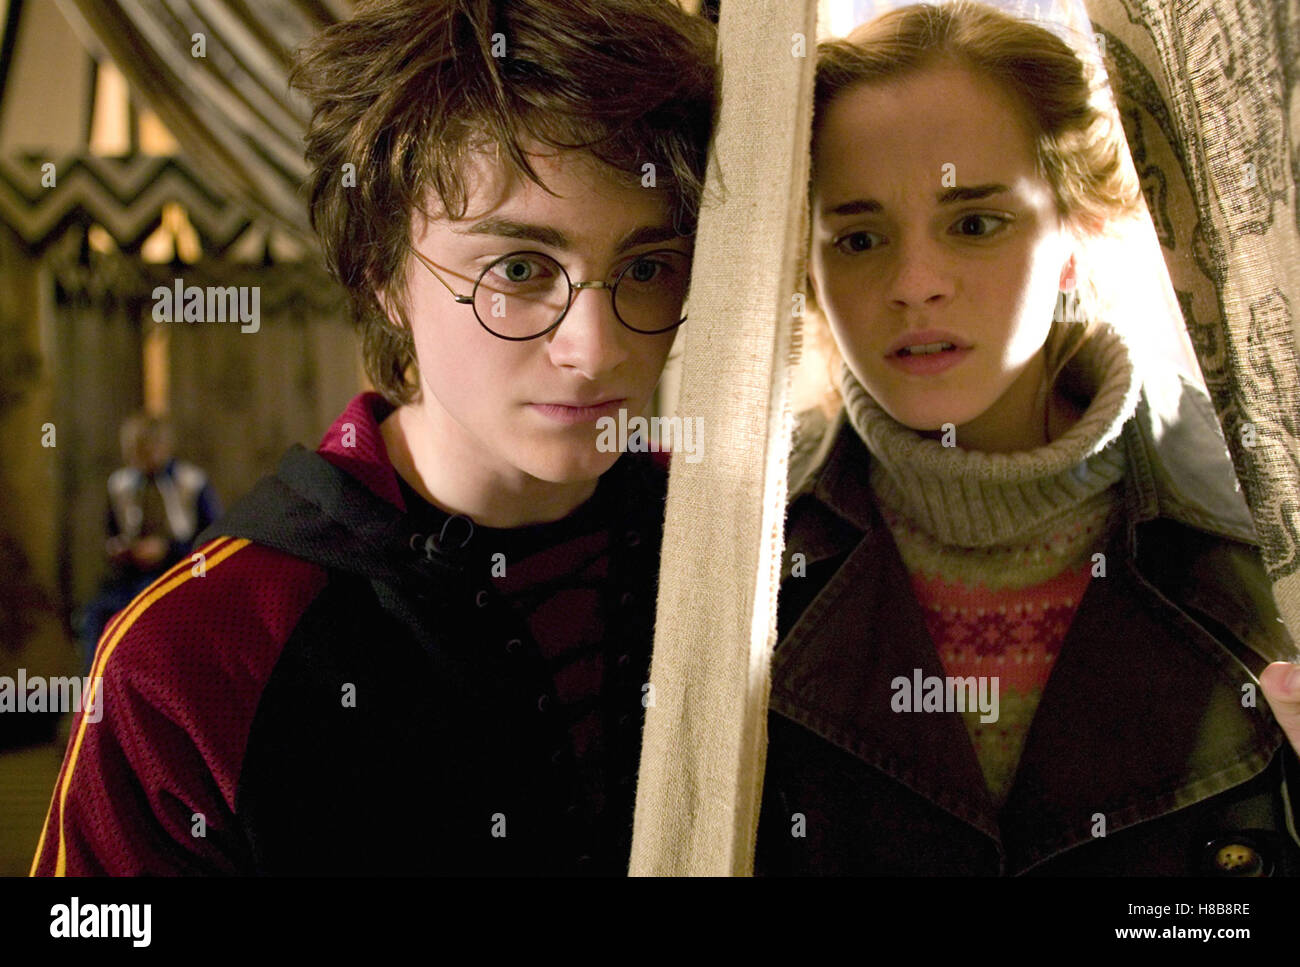 Harry Potter und der Feuerkelch, (HARRY POTTER AND THE GOBLET OF FIRE) GB-USA 2005, Regie: Mike Newell, DANIEL RADCLIFFE, EMMA WATSON Stock Photo